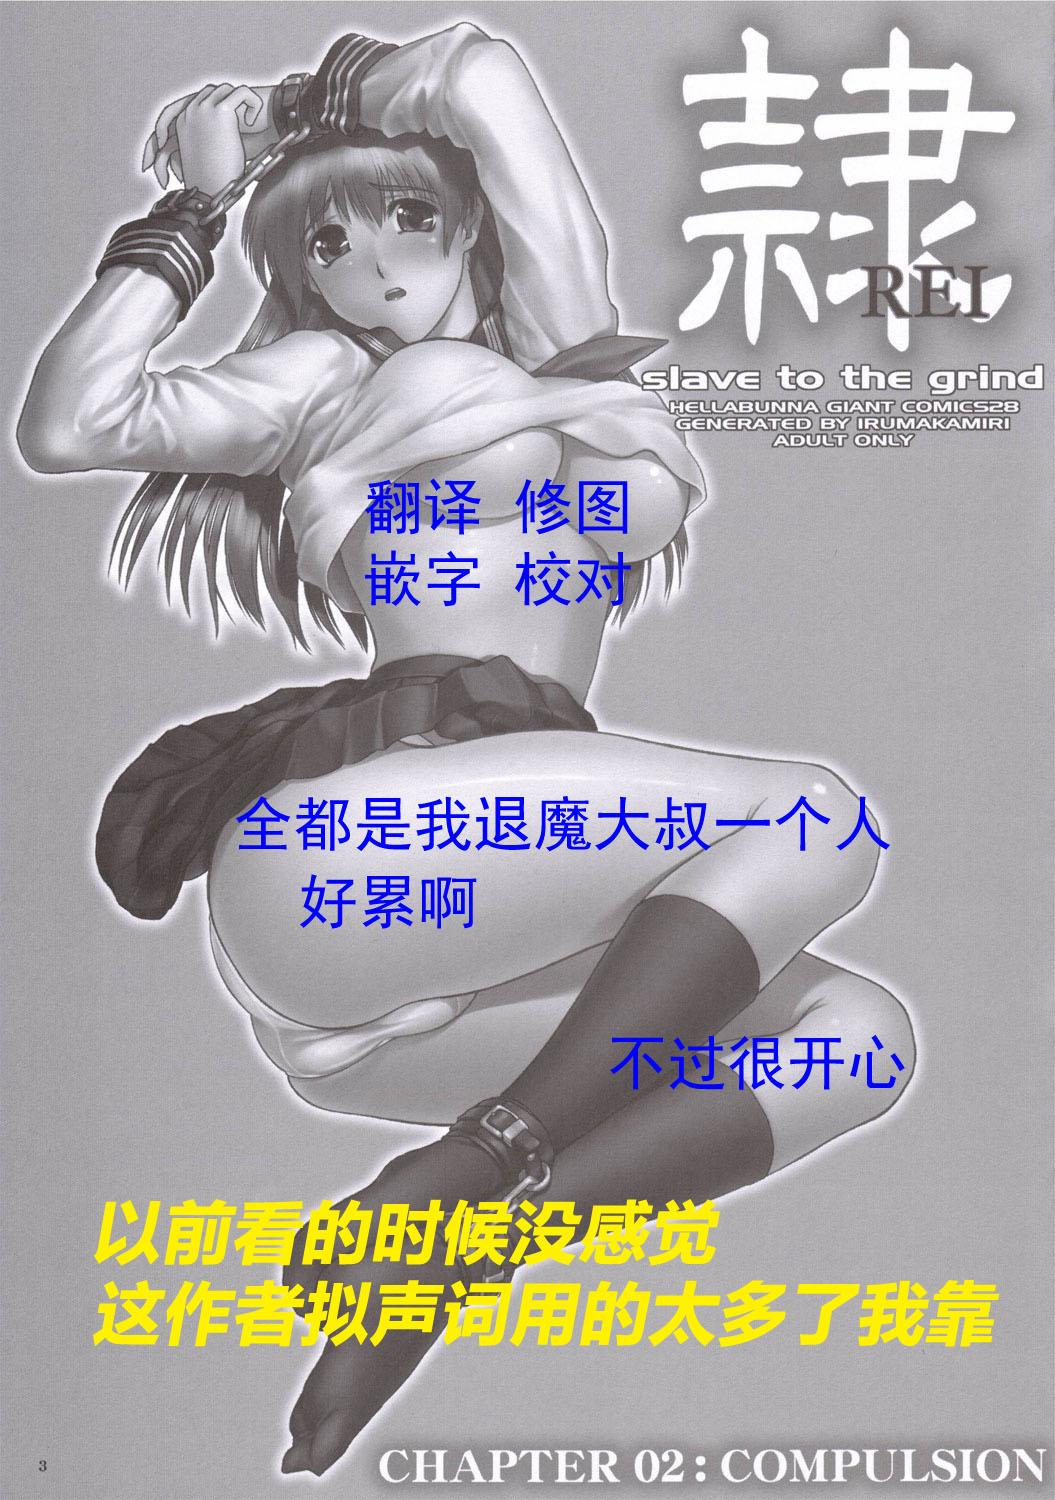 Stripper (C69) [Hellabunna (Iruma Kamiri)] REI - slave to the grind - CHAPTER 02: COMPULSION (Dead or Alive) [Chinese] [退魔大叔个人汉化] - Dead or alive Fucking Pussy - Page 3